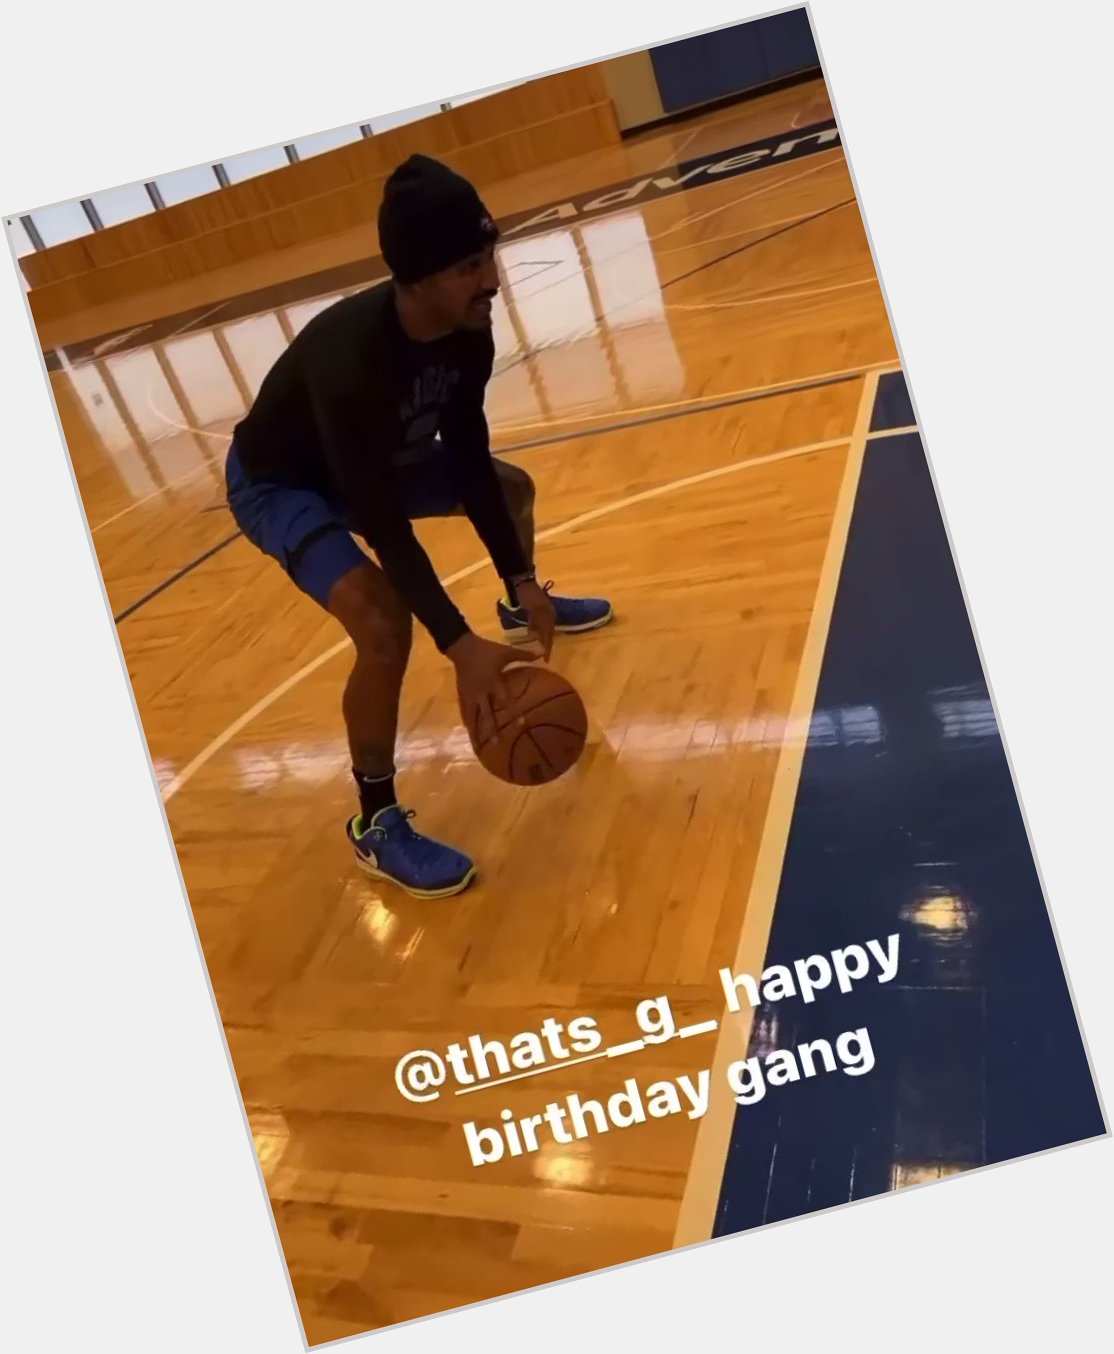 Good to see Gary Gary Harris Harris back on the court so soon after surgery! Happy bday G! 